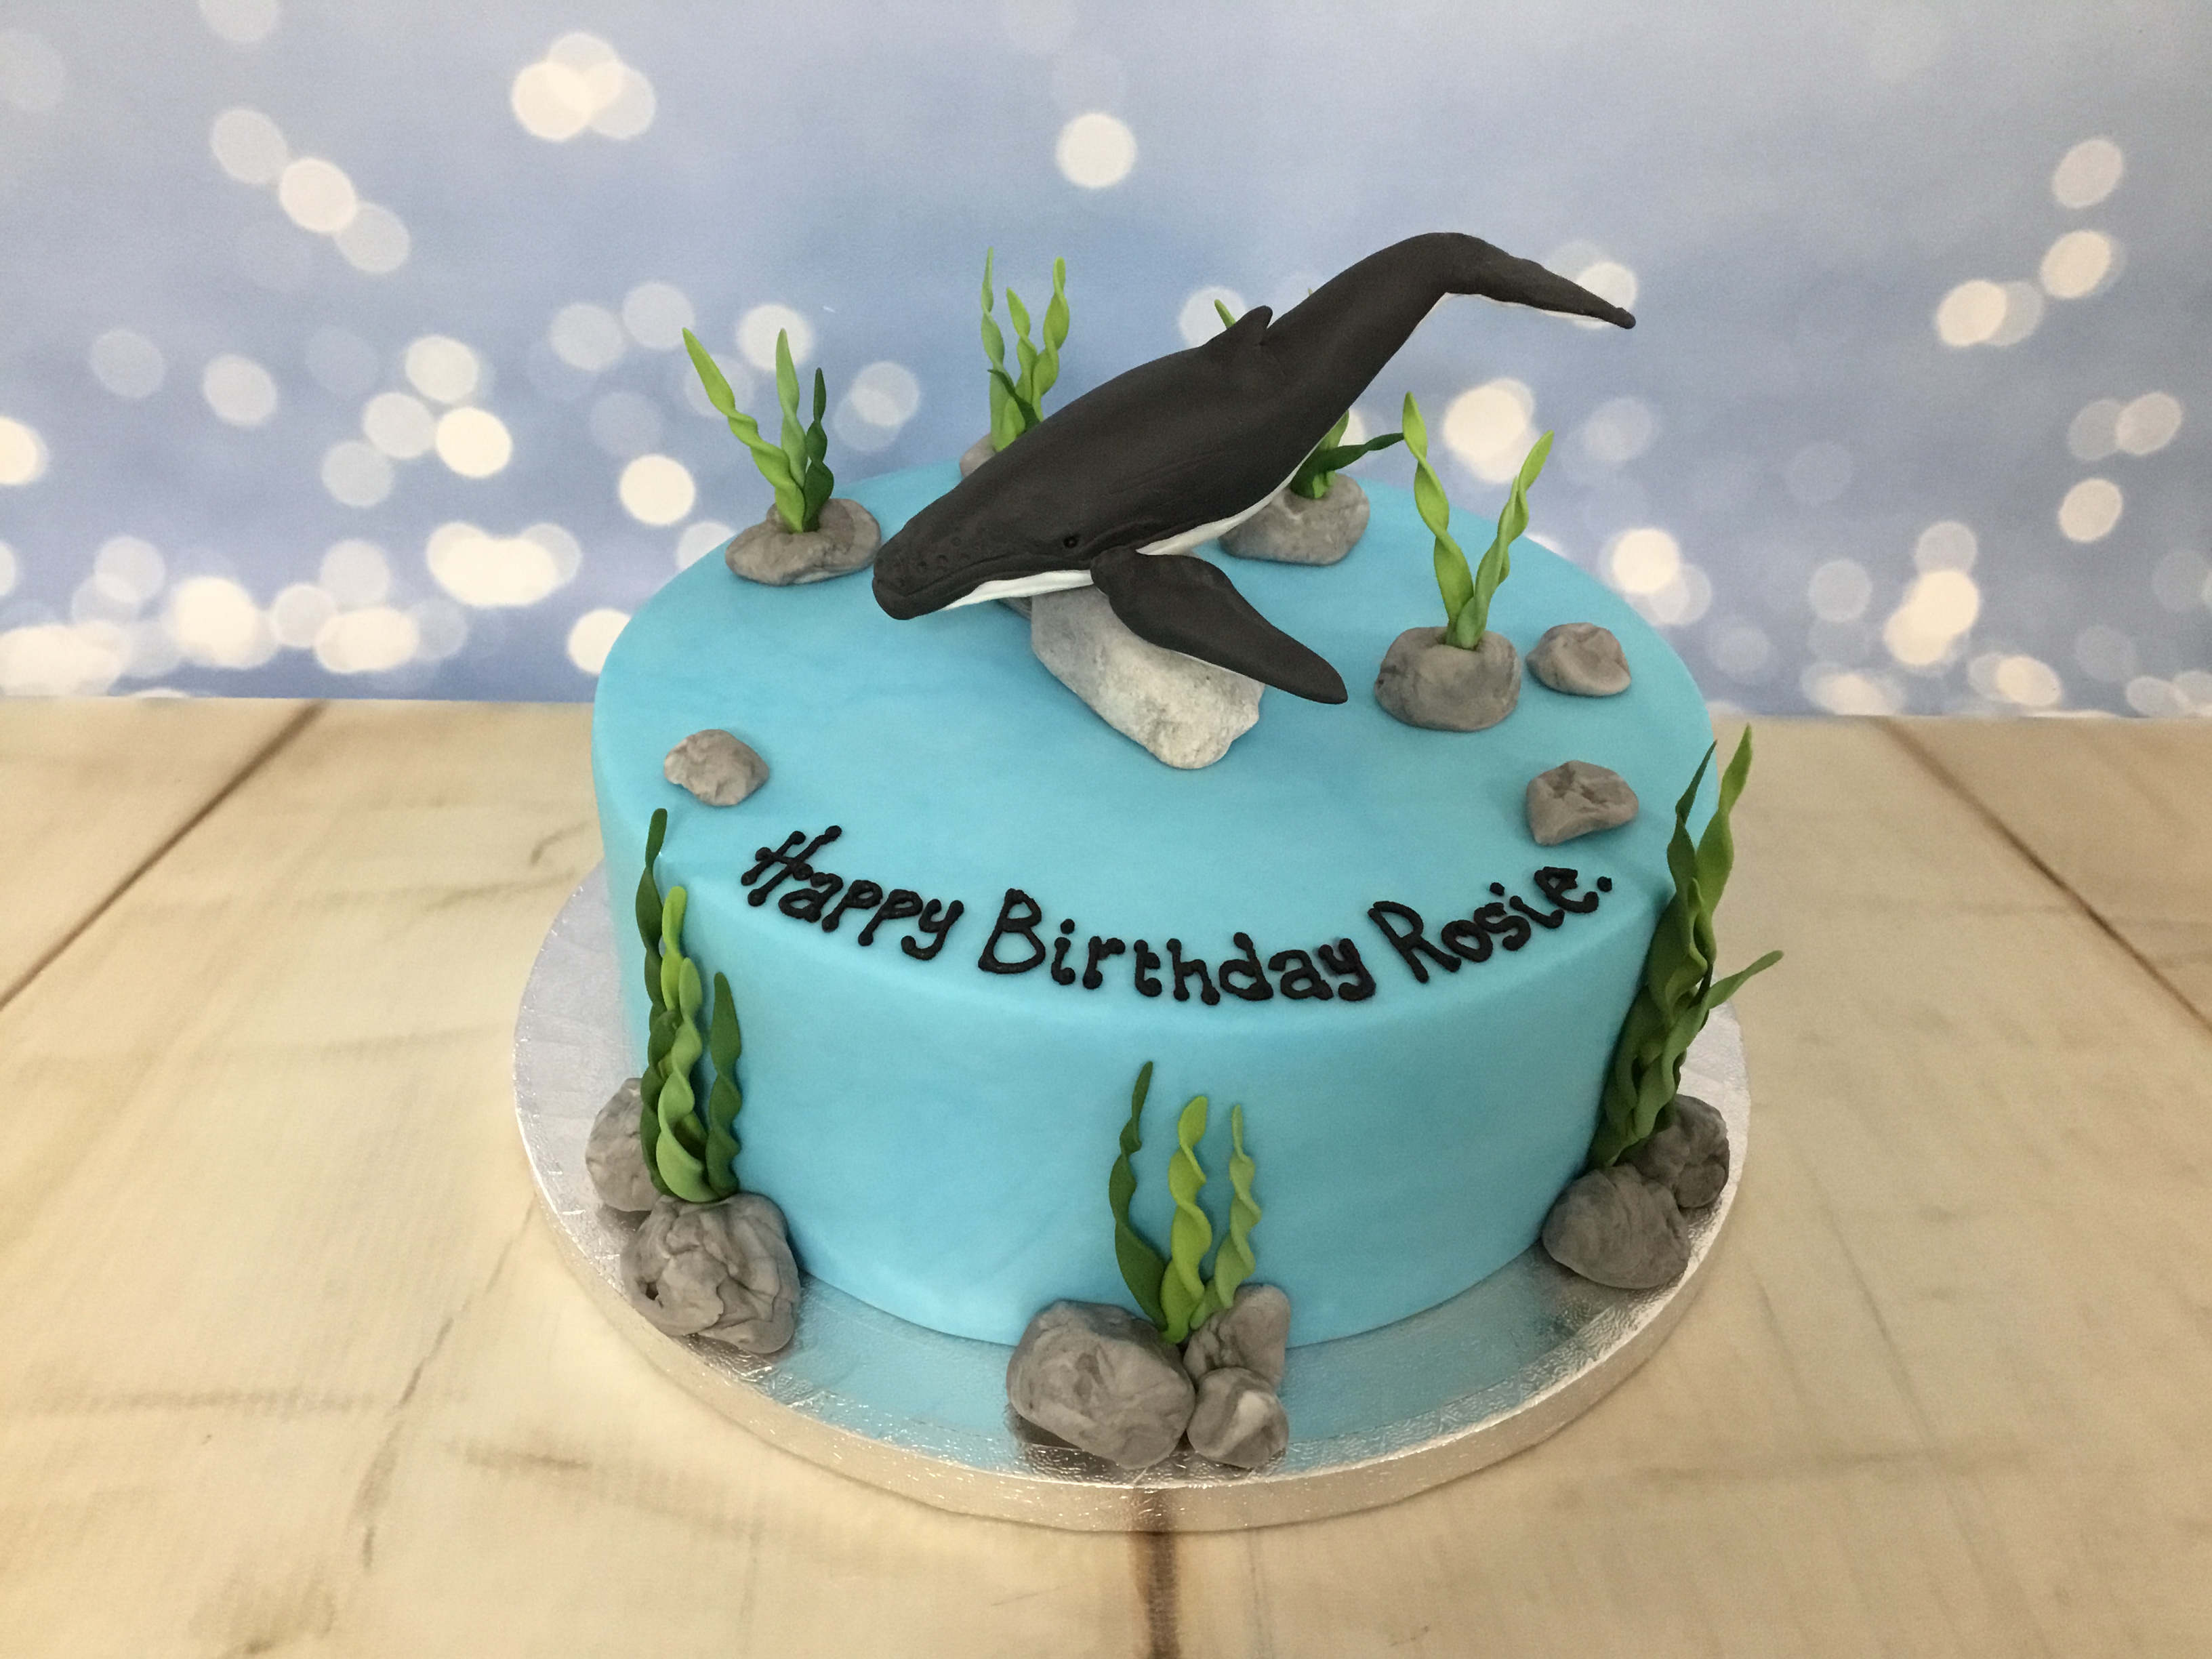 Cruise ship in the Sea Cake – Crave by Leena